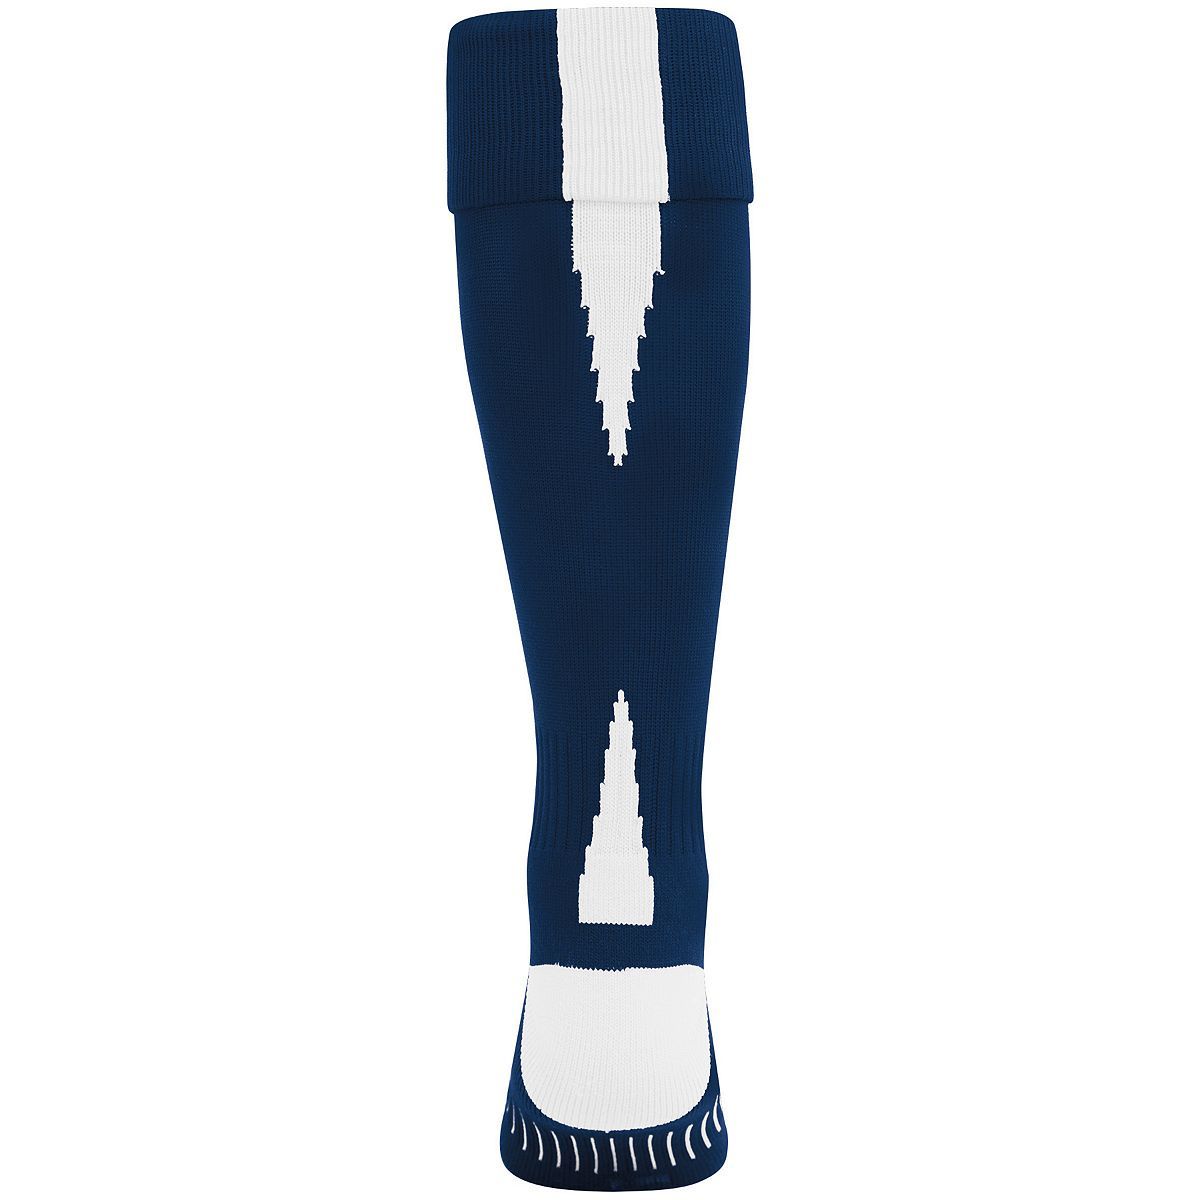 High 5 Performance Sock in Navy/White  -Part of the Accessories, High5-Products, Accessories-Socks product lines at KanaleyCreations.com